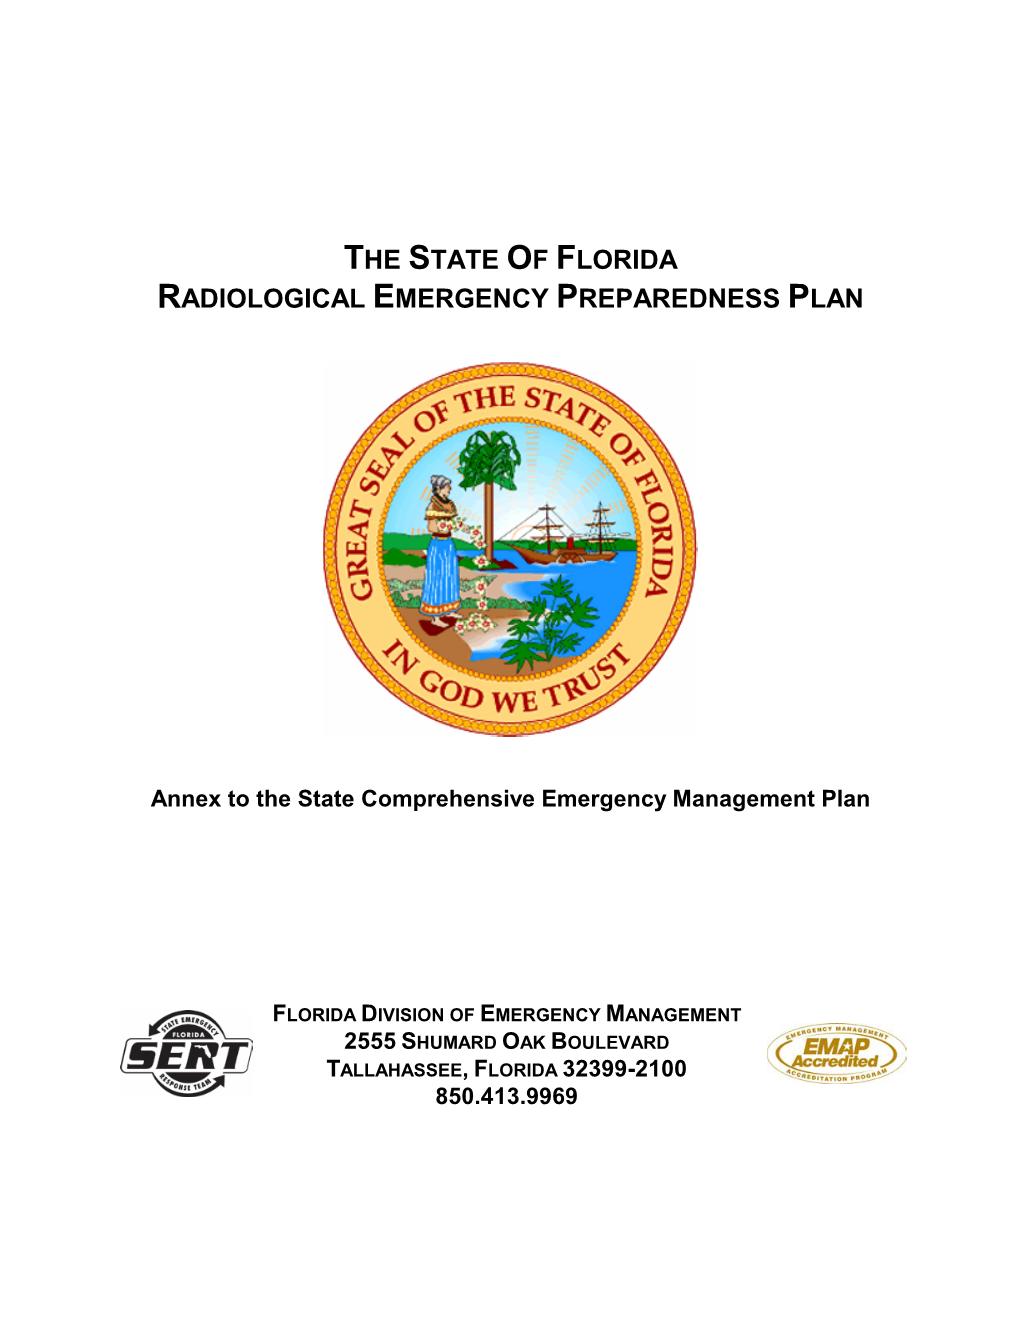 The State of Florida Radiological Emergency Preparedness Plan